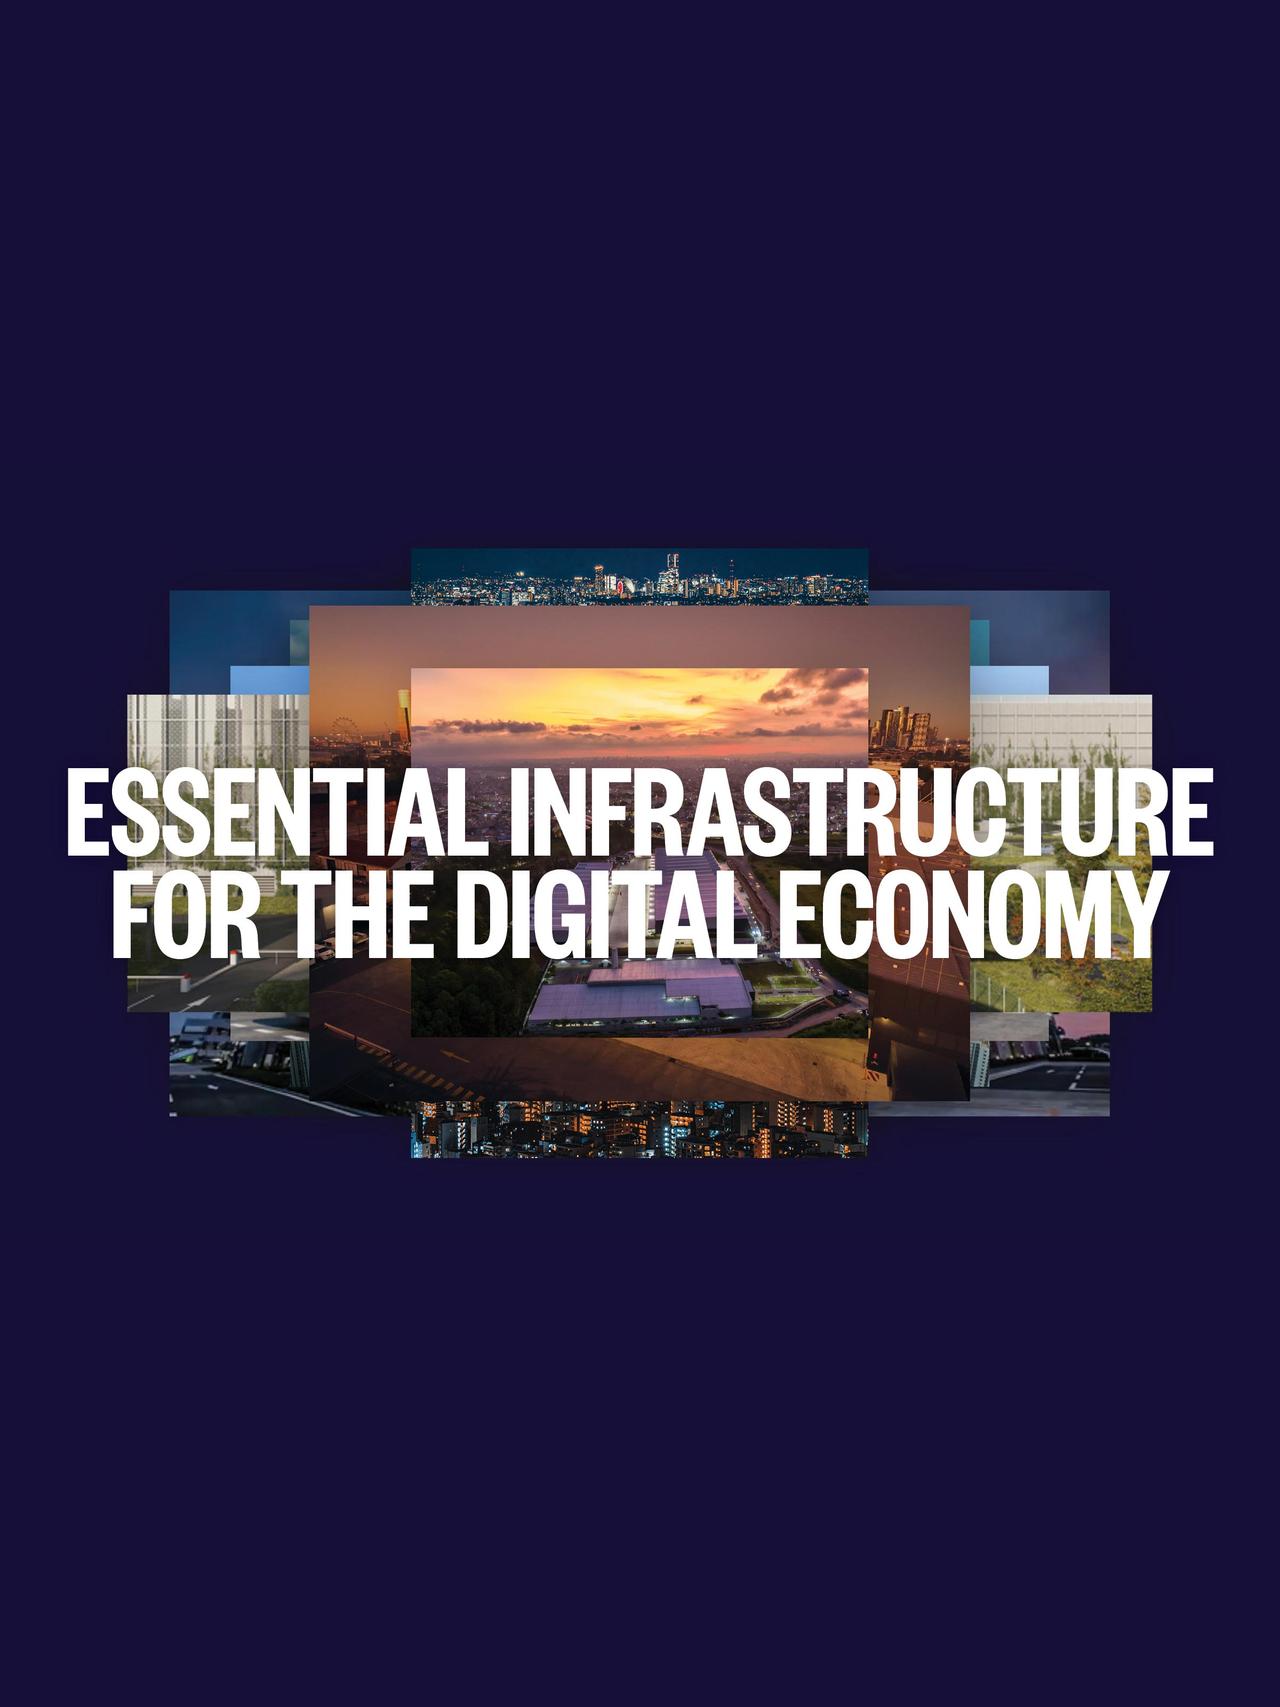 Essential infrastructure for the digital economy